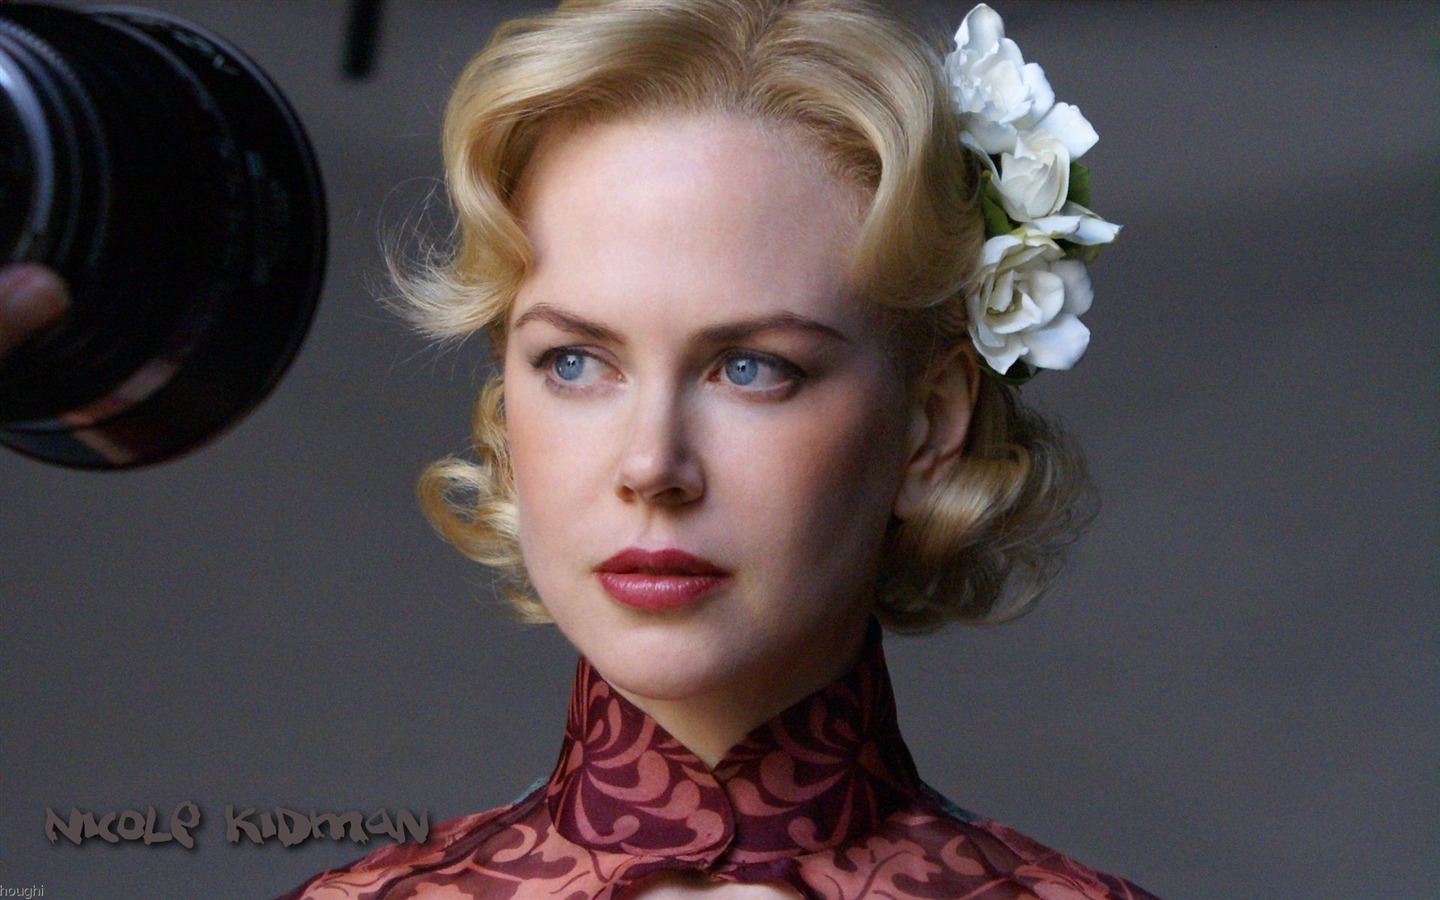 Nicole Kidman #002 - 1440x900 Wallpapers Pictures Photos Images